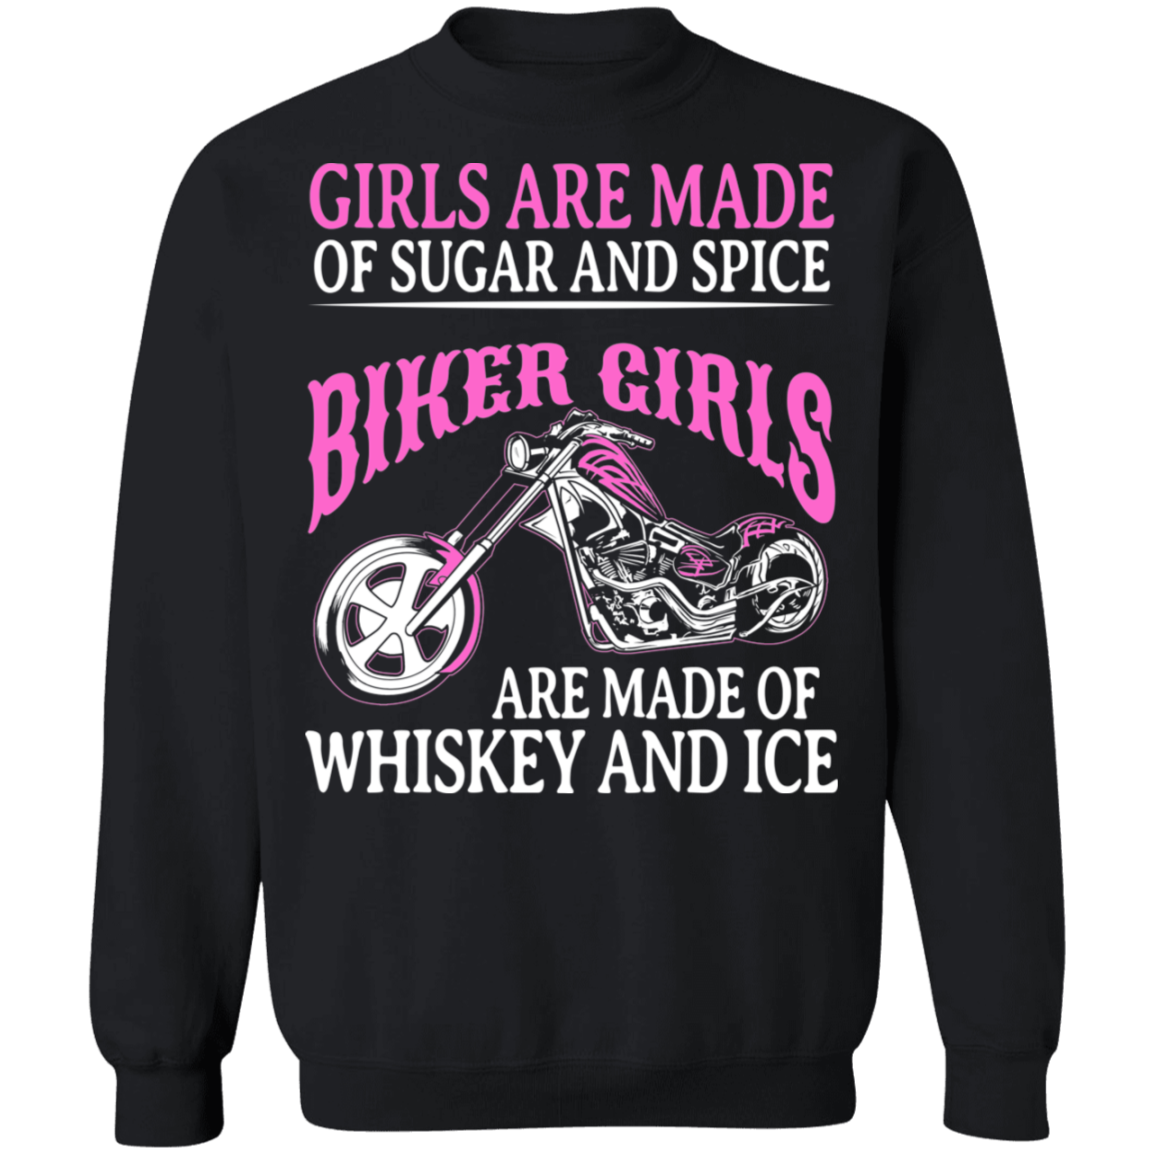 Biker girls are made of whisky and ice Shirt